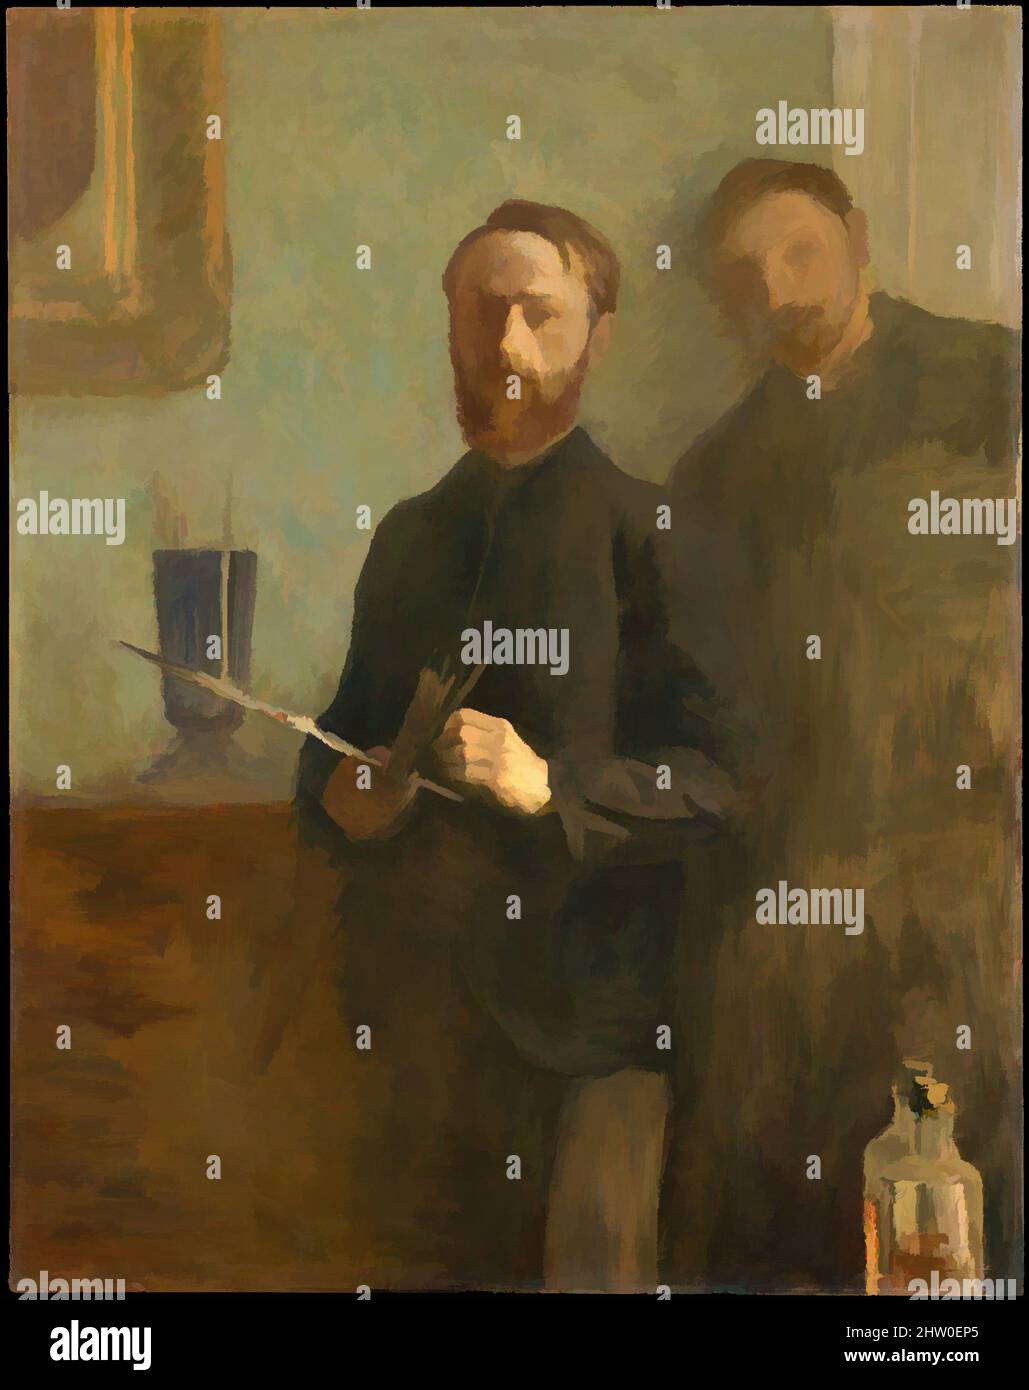 Art inspired by Self-Portrait with Waroquy, 1889, Oil on canvas, 36 1/2 x 28 1/2 in. (92.7 x 72.4 cm), Paintings, Édouard Vuillard (French, Cuiseaux 1868–1940 La Baule), In his sober, high-collared garment, the pensive twenty-three year old Vuillard might be taken for a civil servant, Classic works modernized by Artotop with a splash of modernity. Shapes, color and value, eye-catching visual impact on art. Emotions through freedom of artworks in a contemporary way. A timeless message pursuing a wildly creative new direction. Artists turning to the digital medium and creating the Artotop NFT Stock Photo